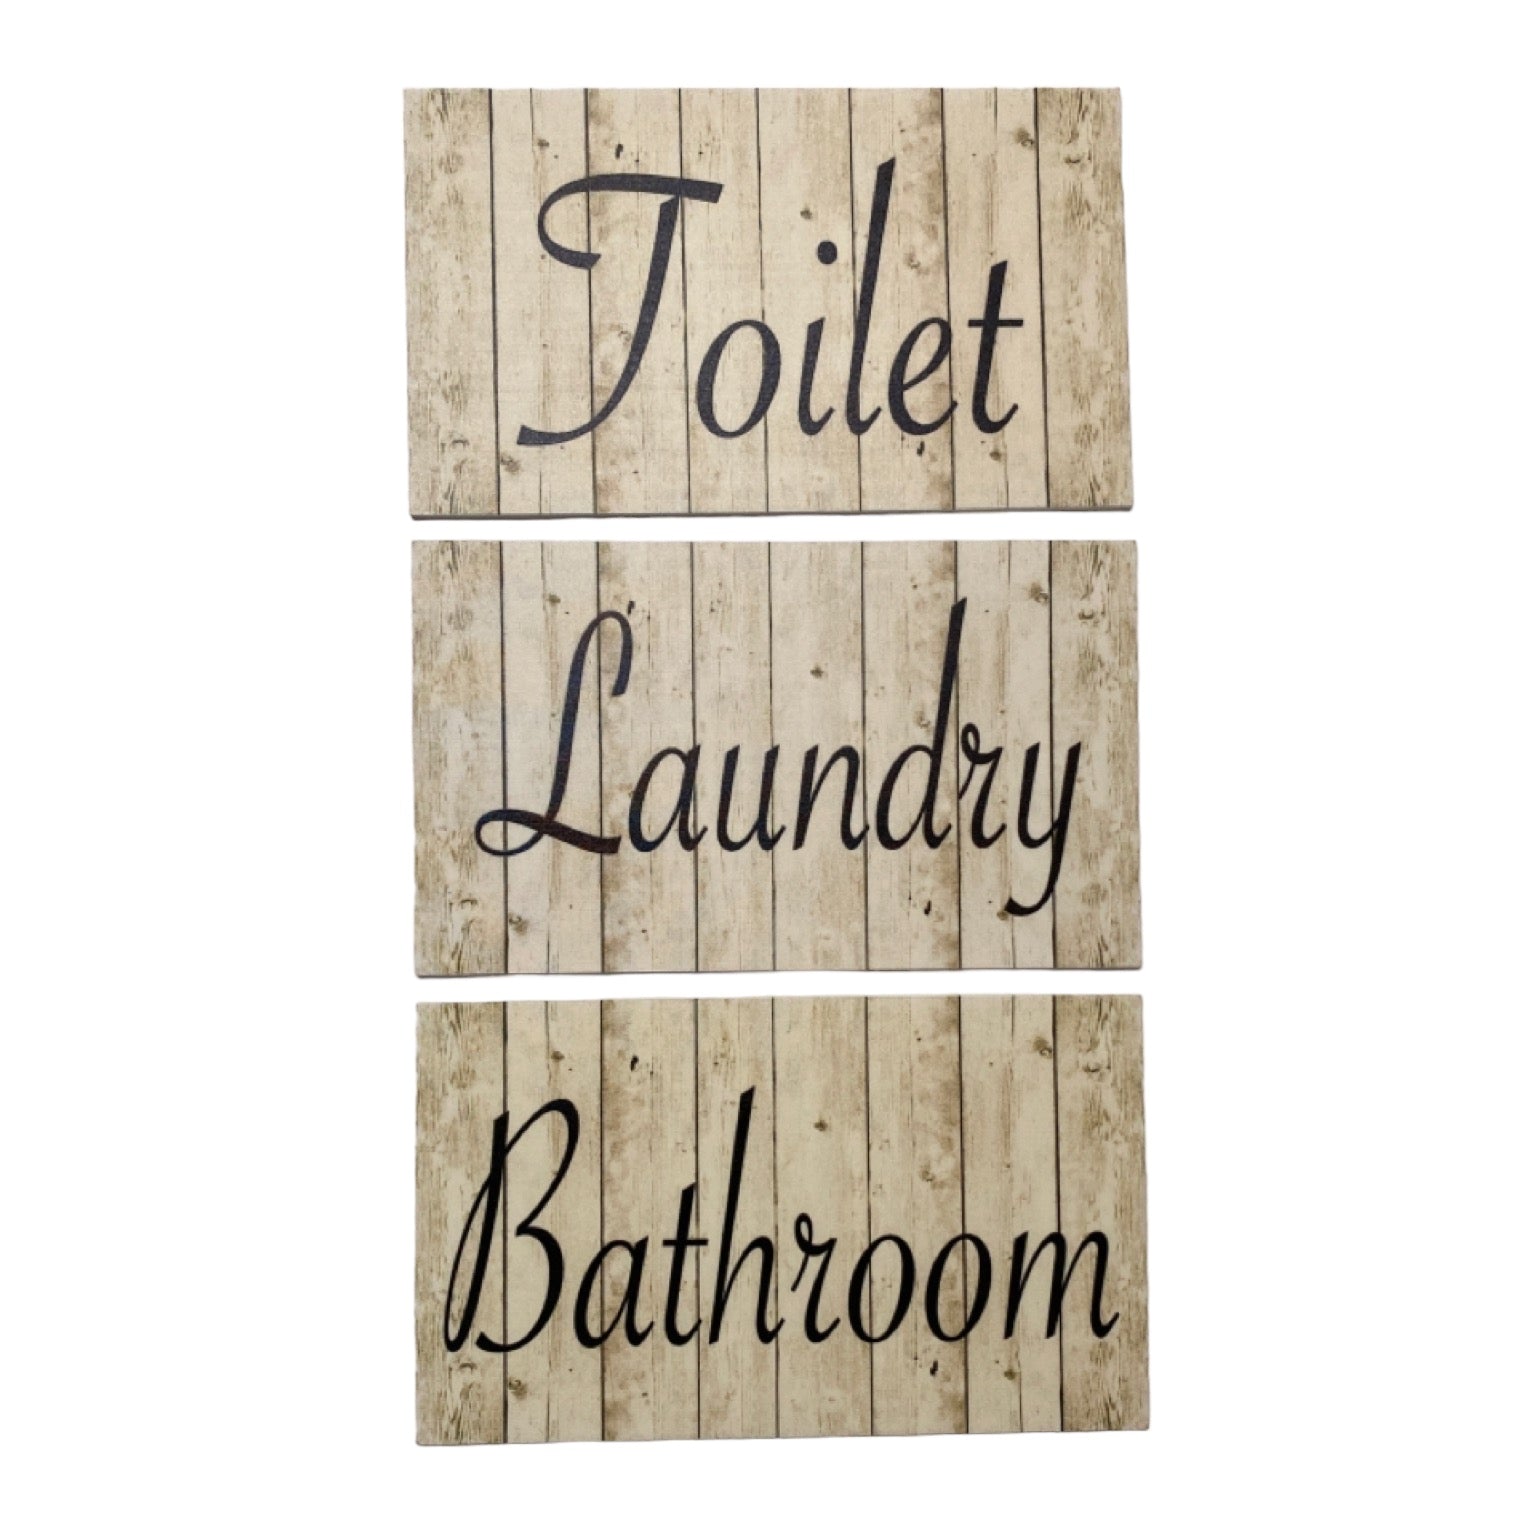 Toilet Laundry Bathroom Country Style Sign - The Renmy Store Homewares & Gifts 